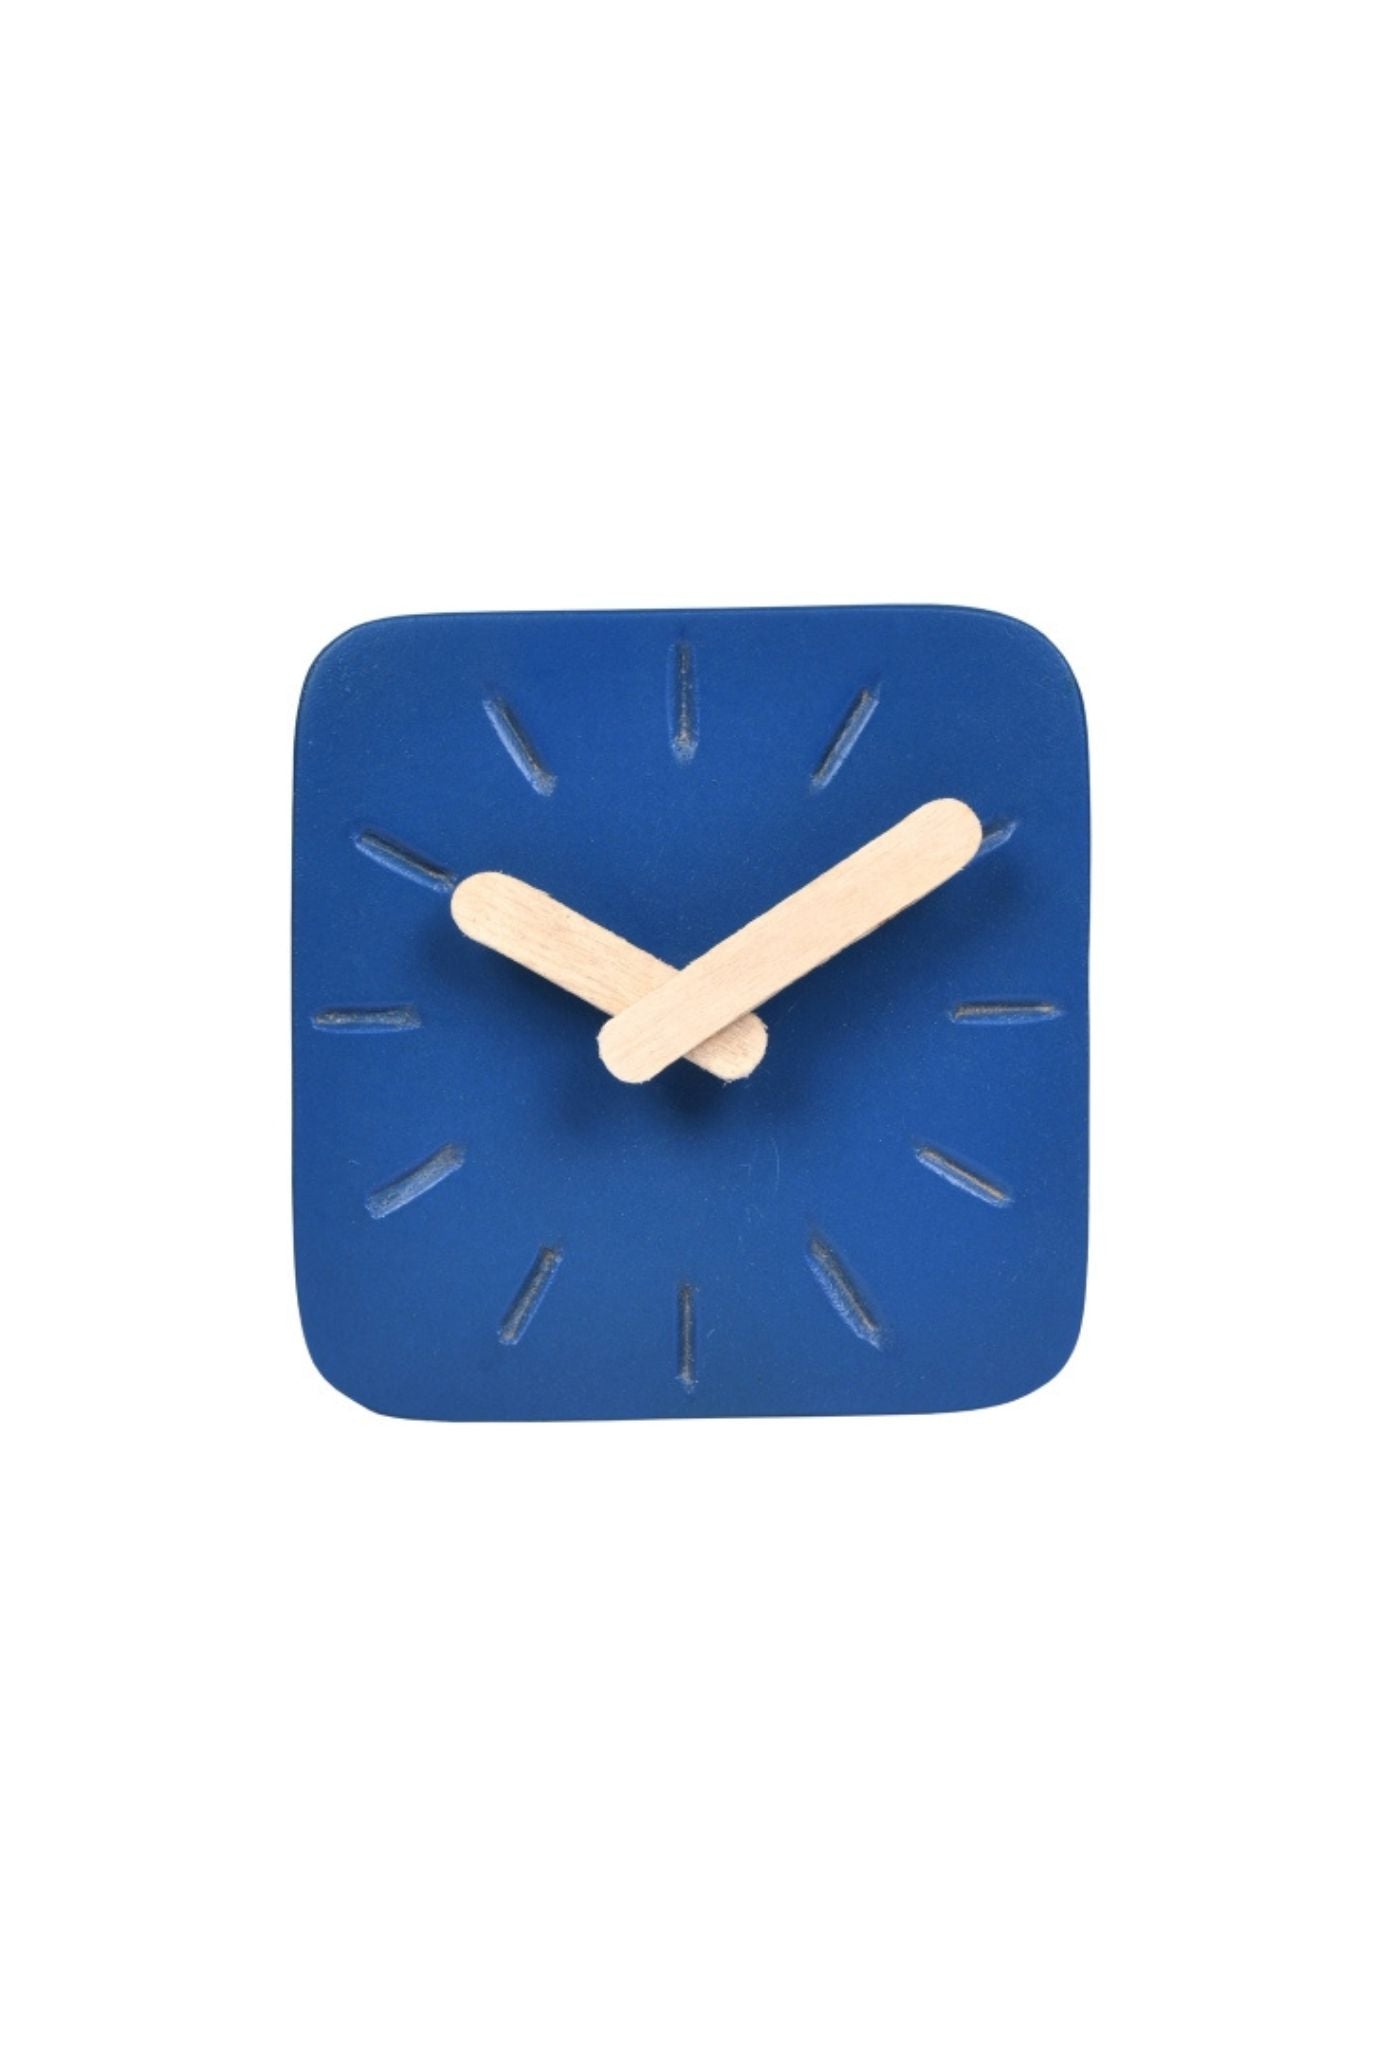 Abuja Table Clock   (SHIPPING ONLY IN INDIA)